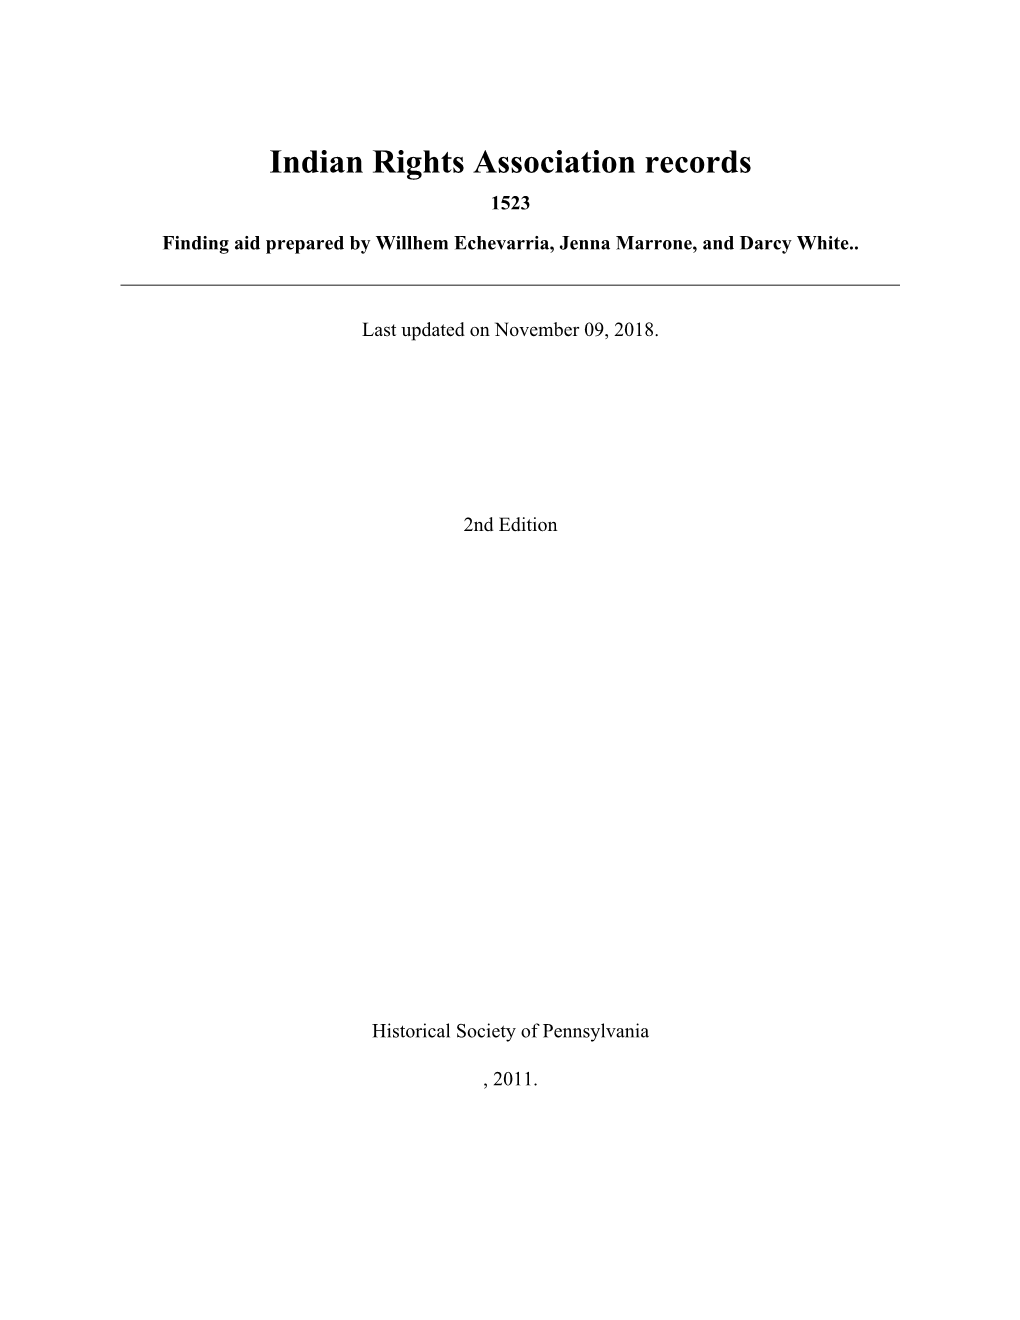 Indian Rights Association Records 1523 Finding Aid Prepared by Willhem Echevarria, Jenna Marrone, and Darcy White